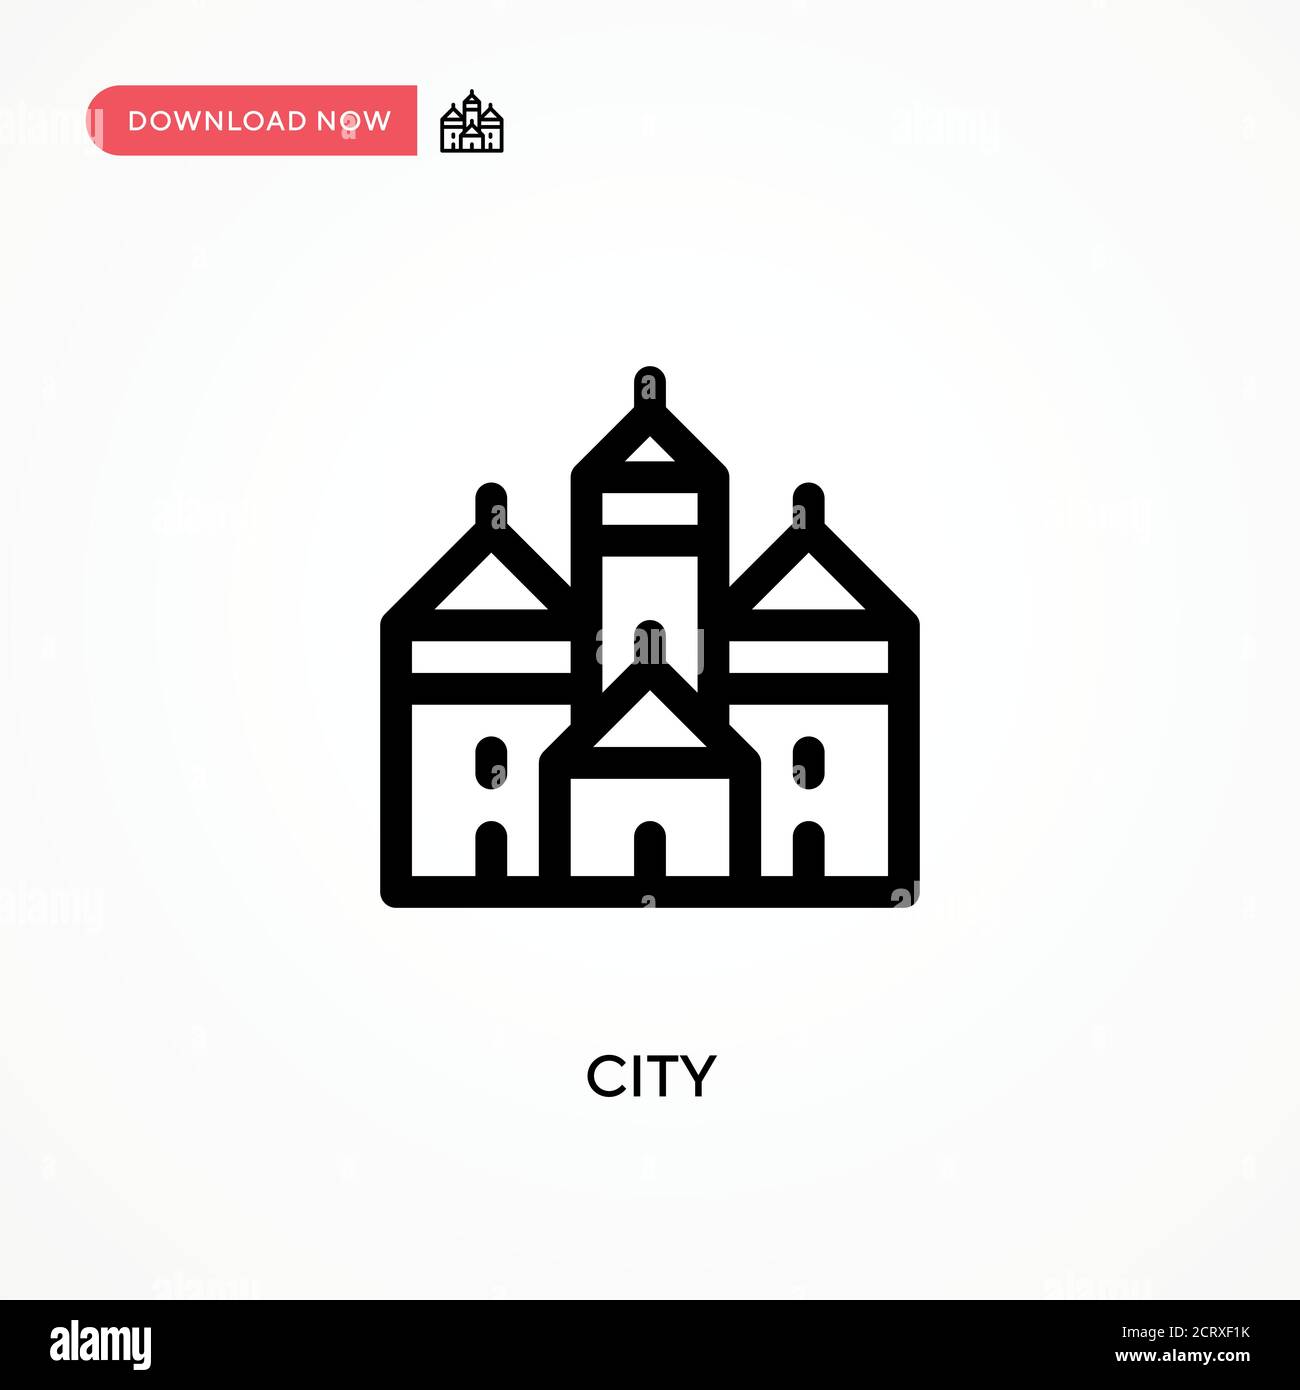 City Simple vector icon. Modern, simple flat vector illustration for web site or mobile app Stock Vector